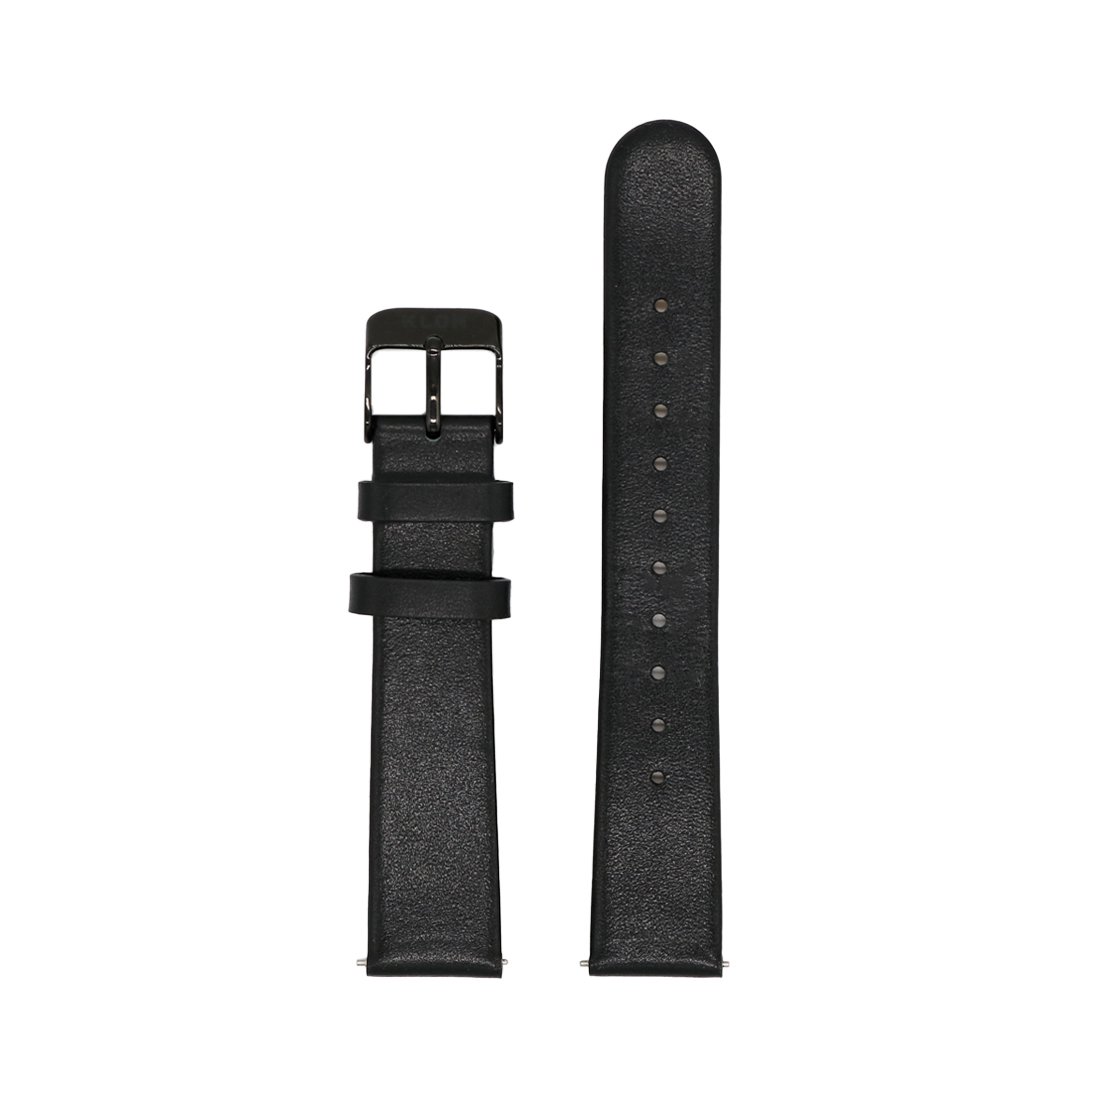 KLON WATCH REPLACEMENT STRAP -IP BLACK LEATHER- 18mm